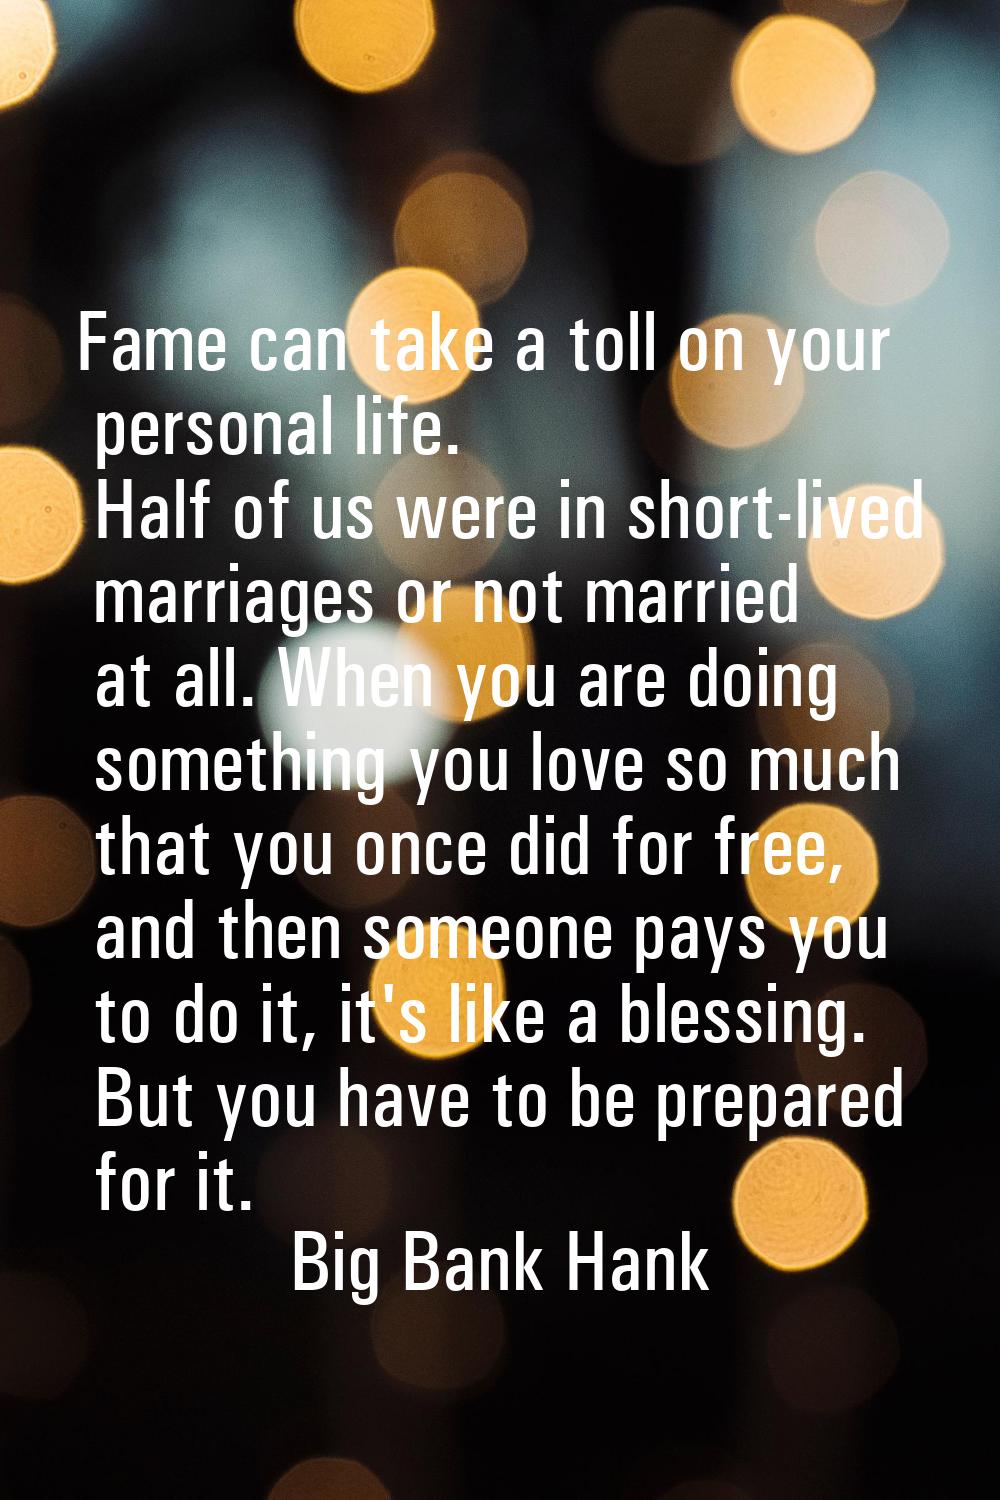 Fame can take a toll on your personal life. Half of us were in short-lived marriages or not married